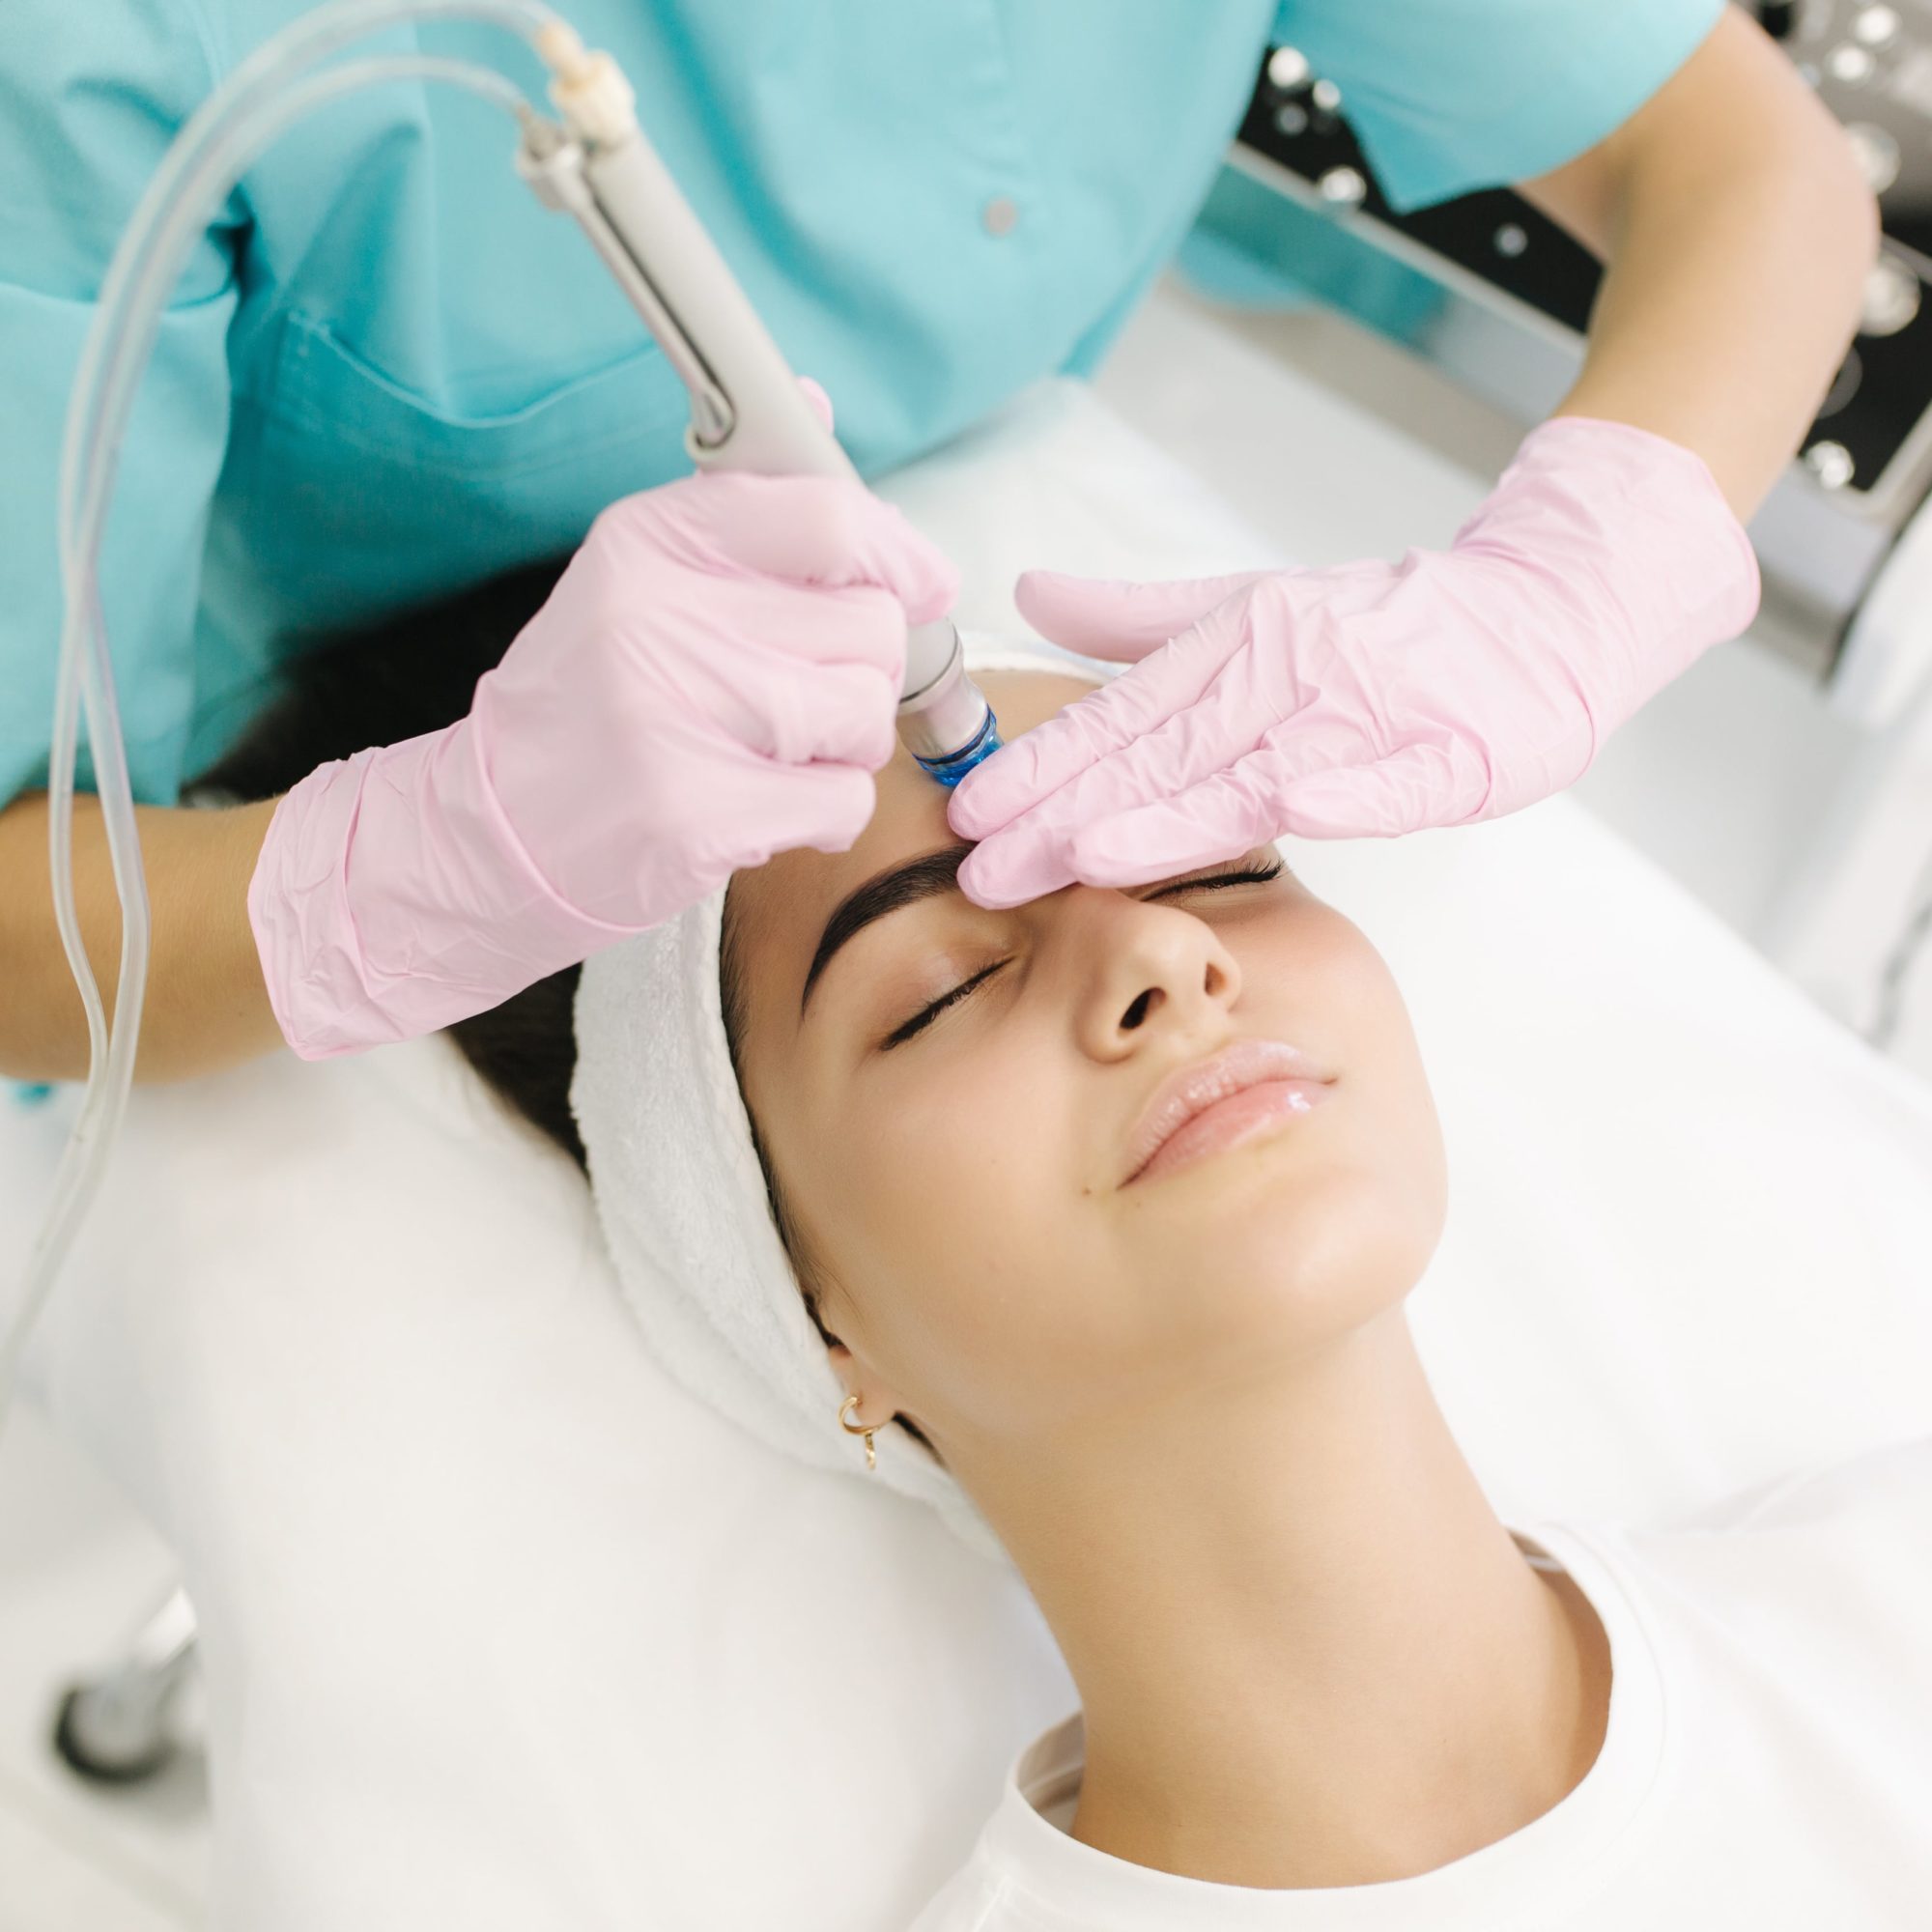 What are the benefits of the HydraFacial treatment